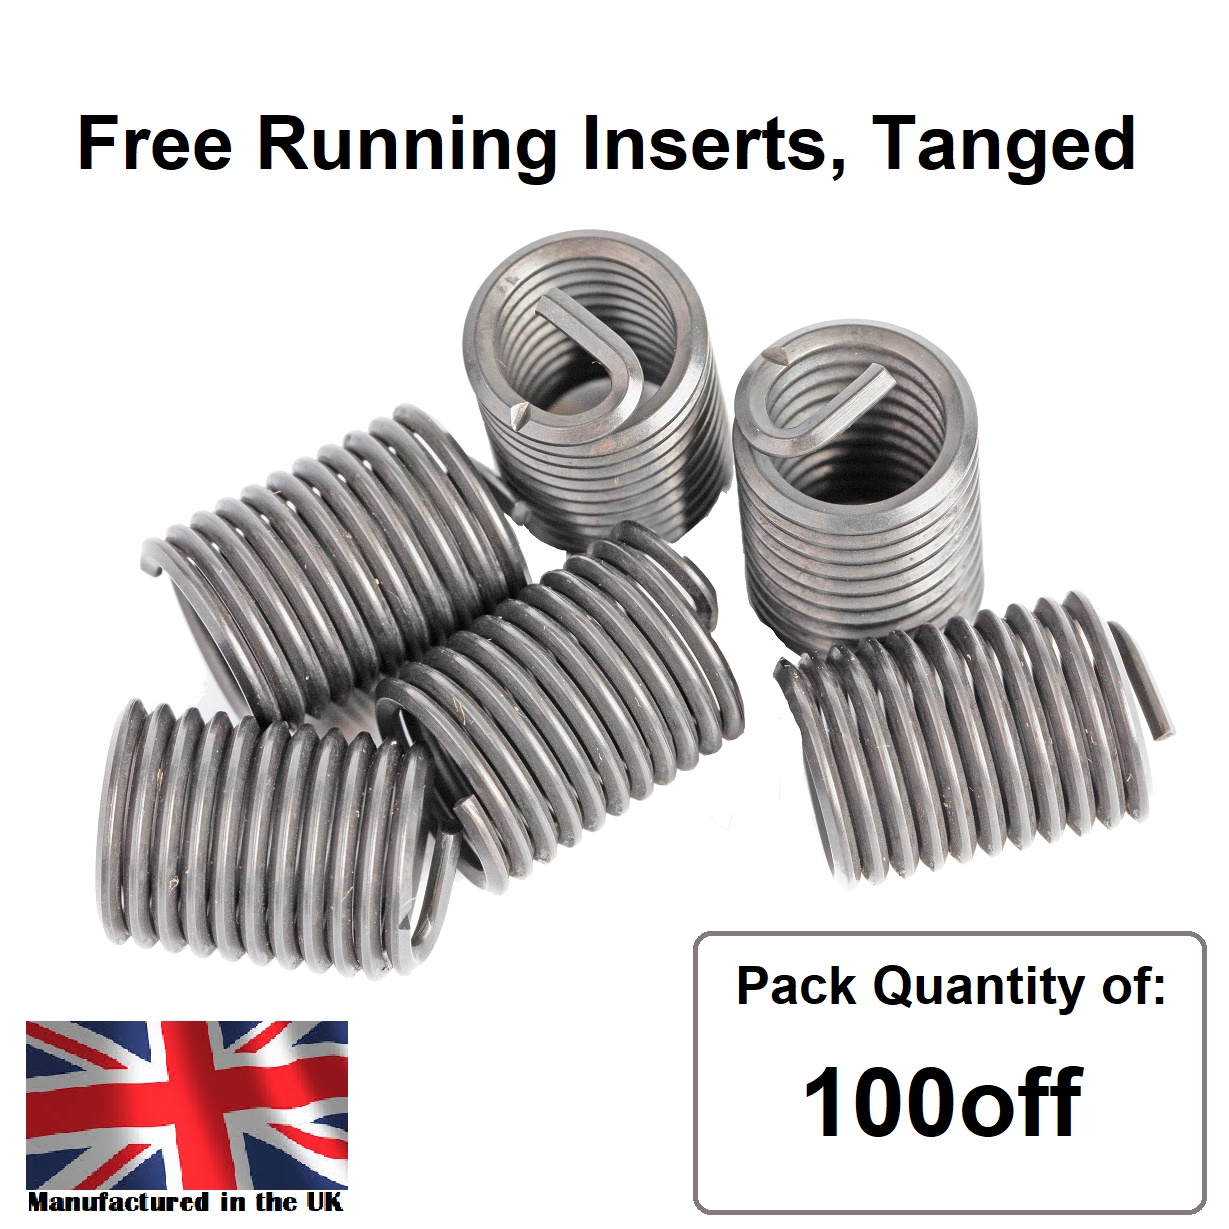 6-32 x 1.5D UNC, Free Running, Tanged, Wire Thread Repair Insert, 304/A2 Stainless (Pack 100)